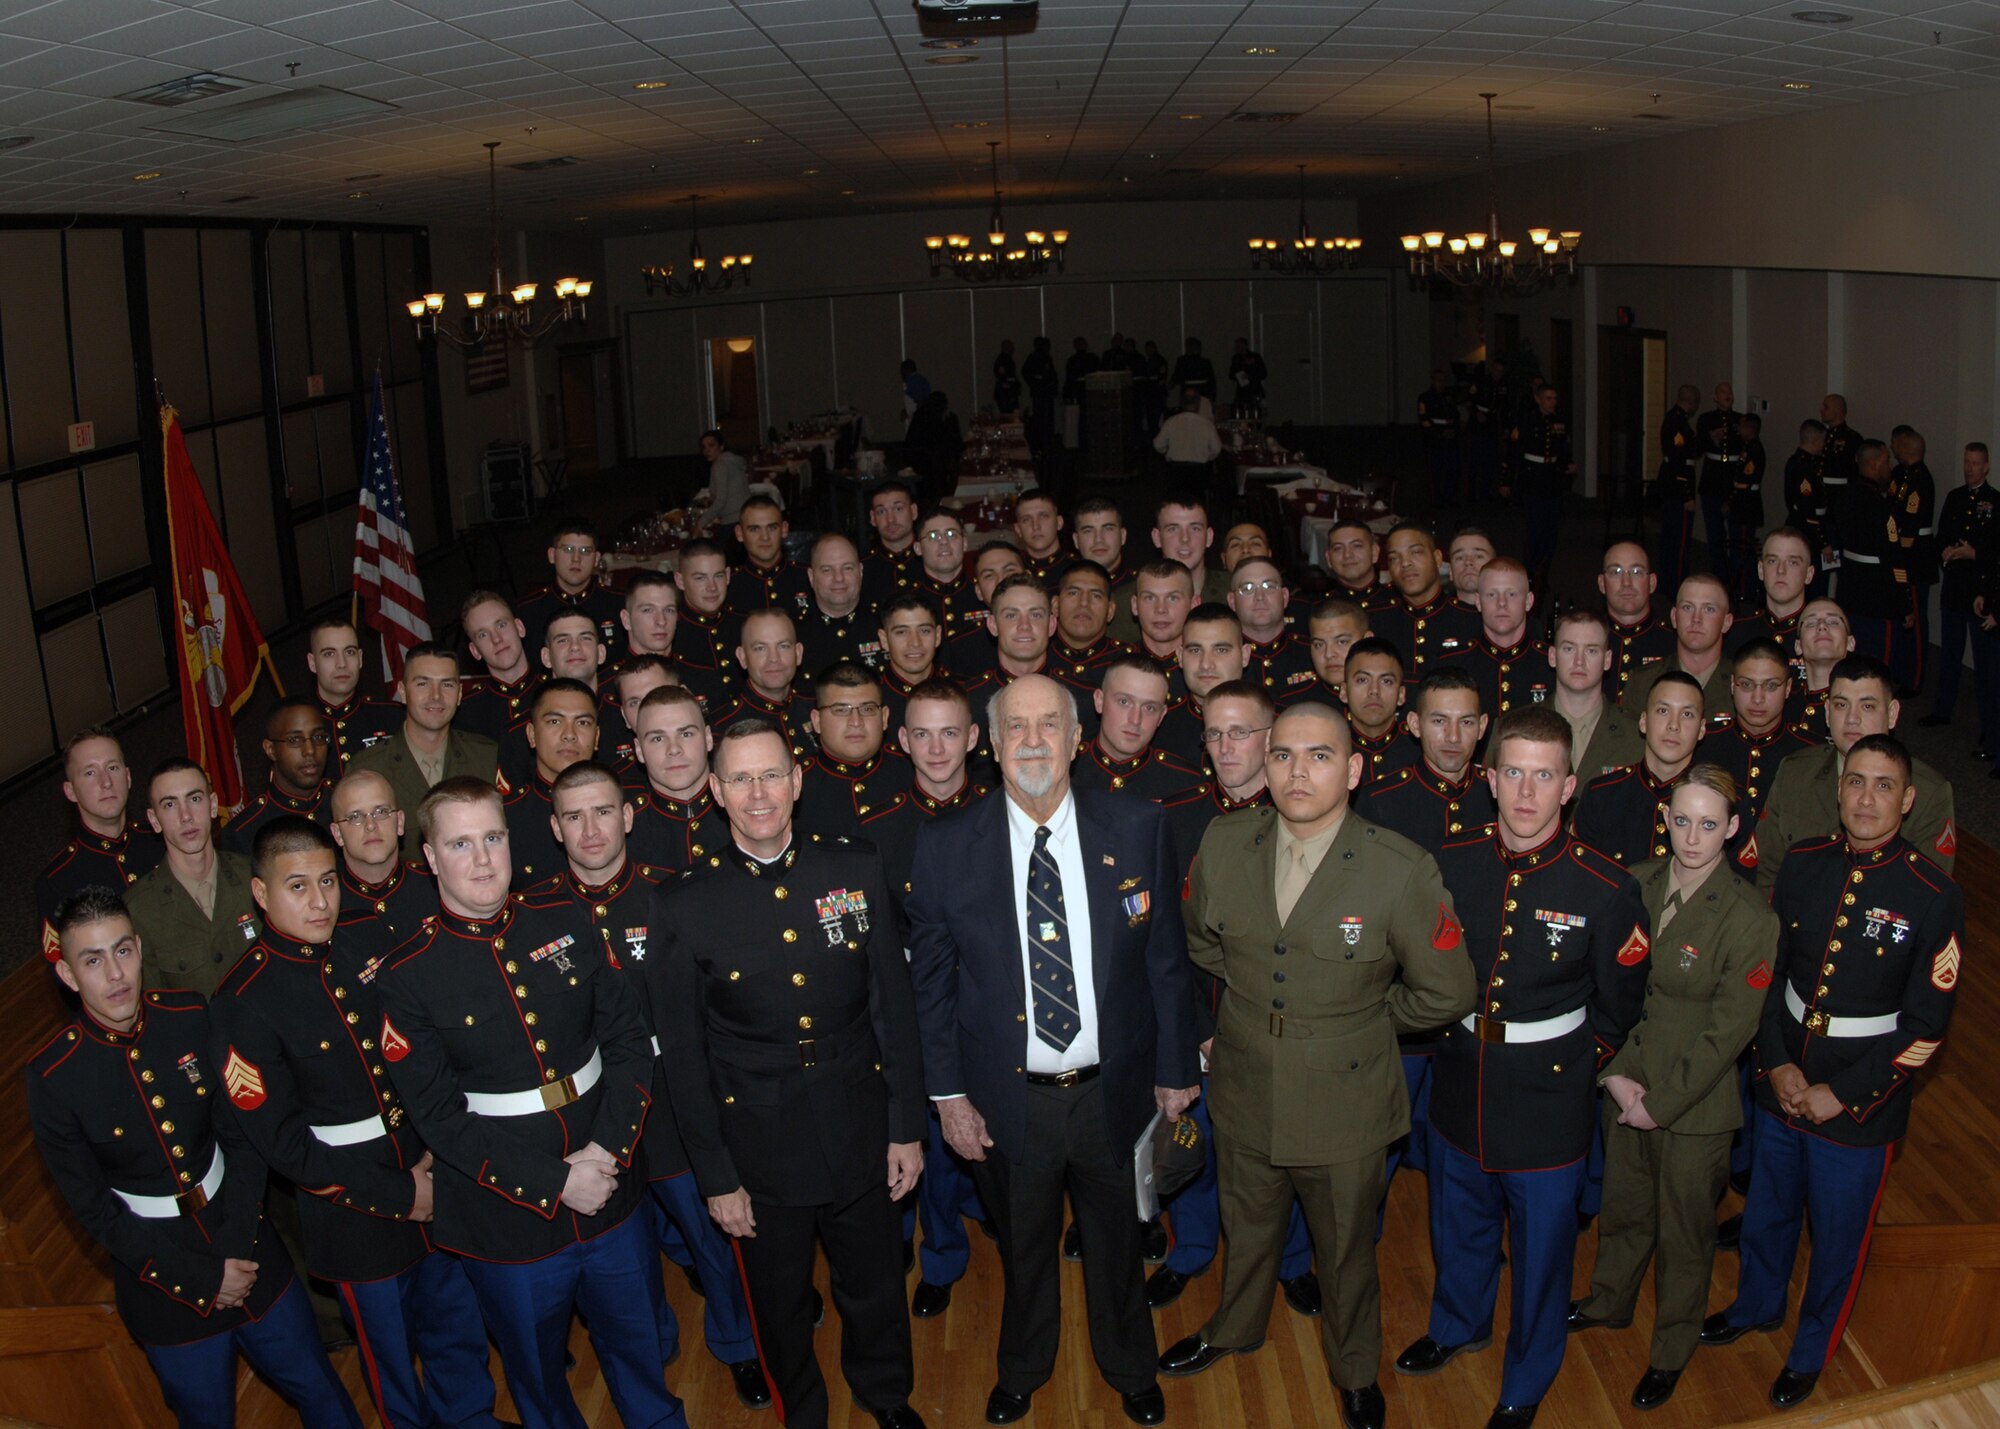 DYESS AFB, Texas-- Marines from Detatchment 1 Motor Transport Maintenence Company gather for a group photo at the Marine Corps Mess Night Jan 19. Among the Marines are Brigadier General Darrell Moore, Commander of the 4th Marine Logistics Group, and U.S. Marine Corps Retired, Major Keith Wells. (U.S. Air Force photo by Airman 1st Class Micheal Breaux)